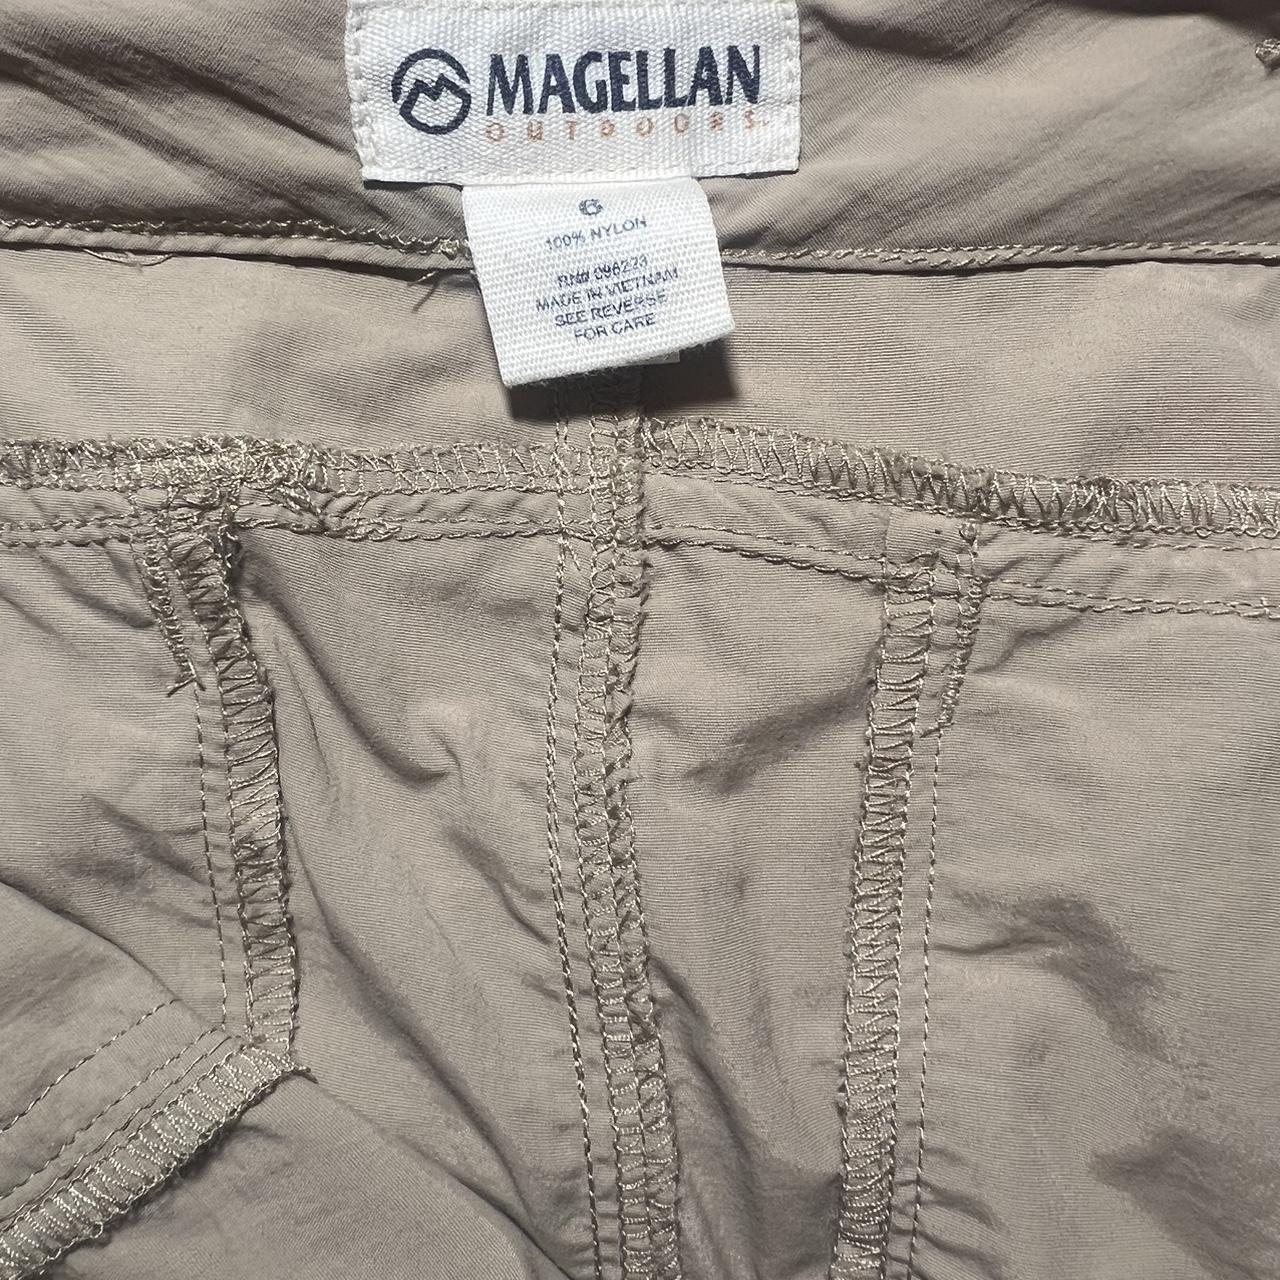 Magellan pants They also turn into shorts if you... - Depop